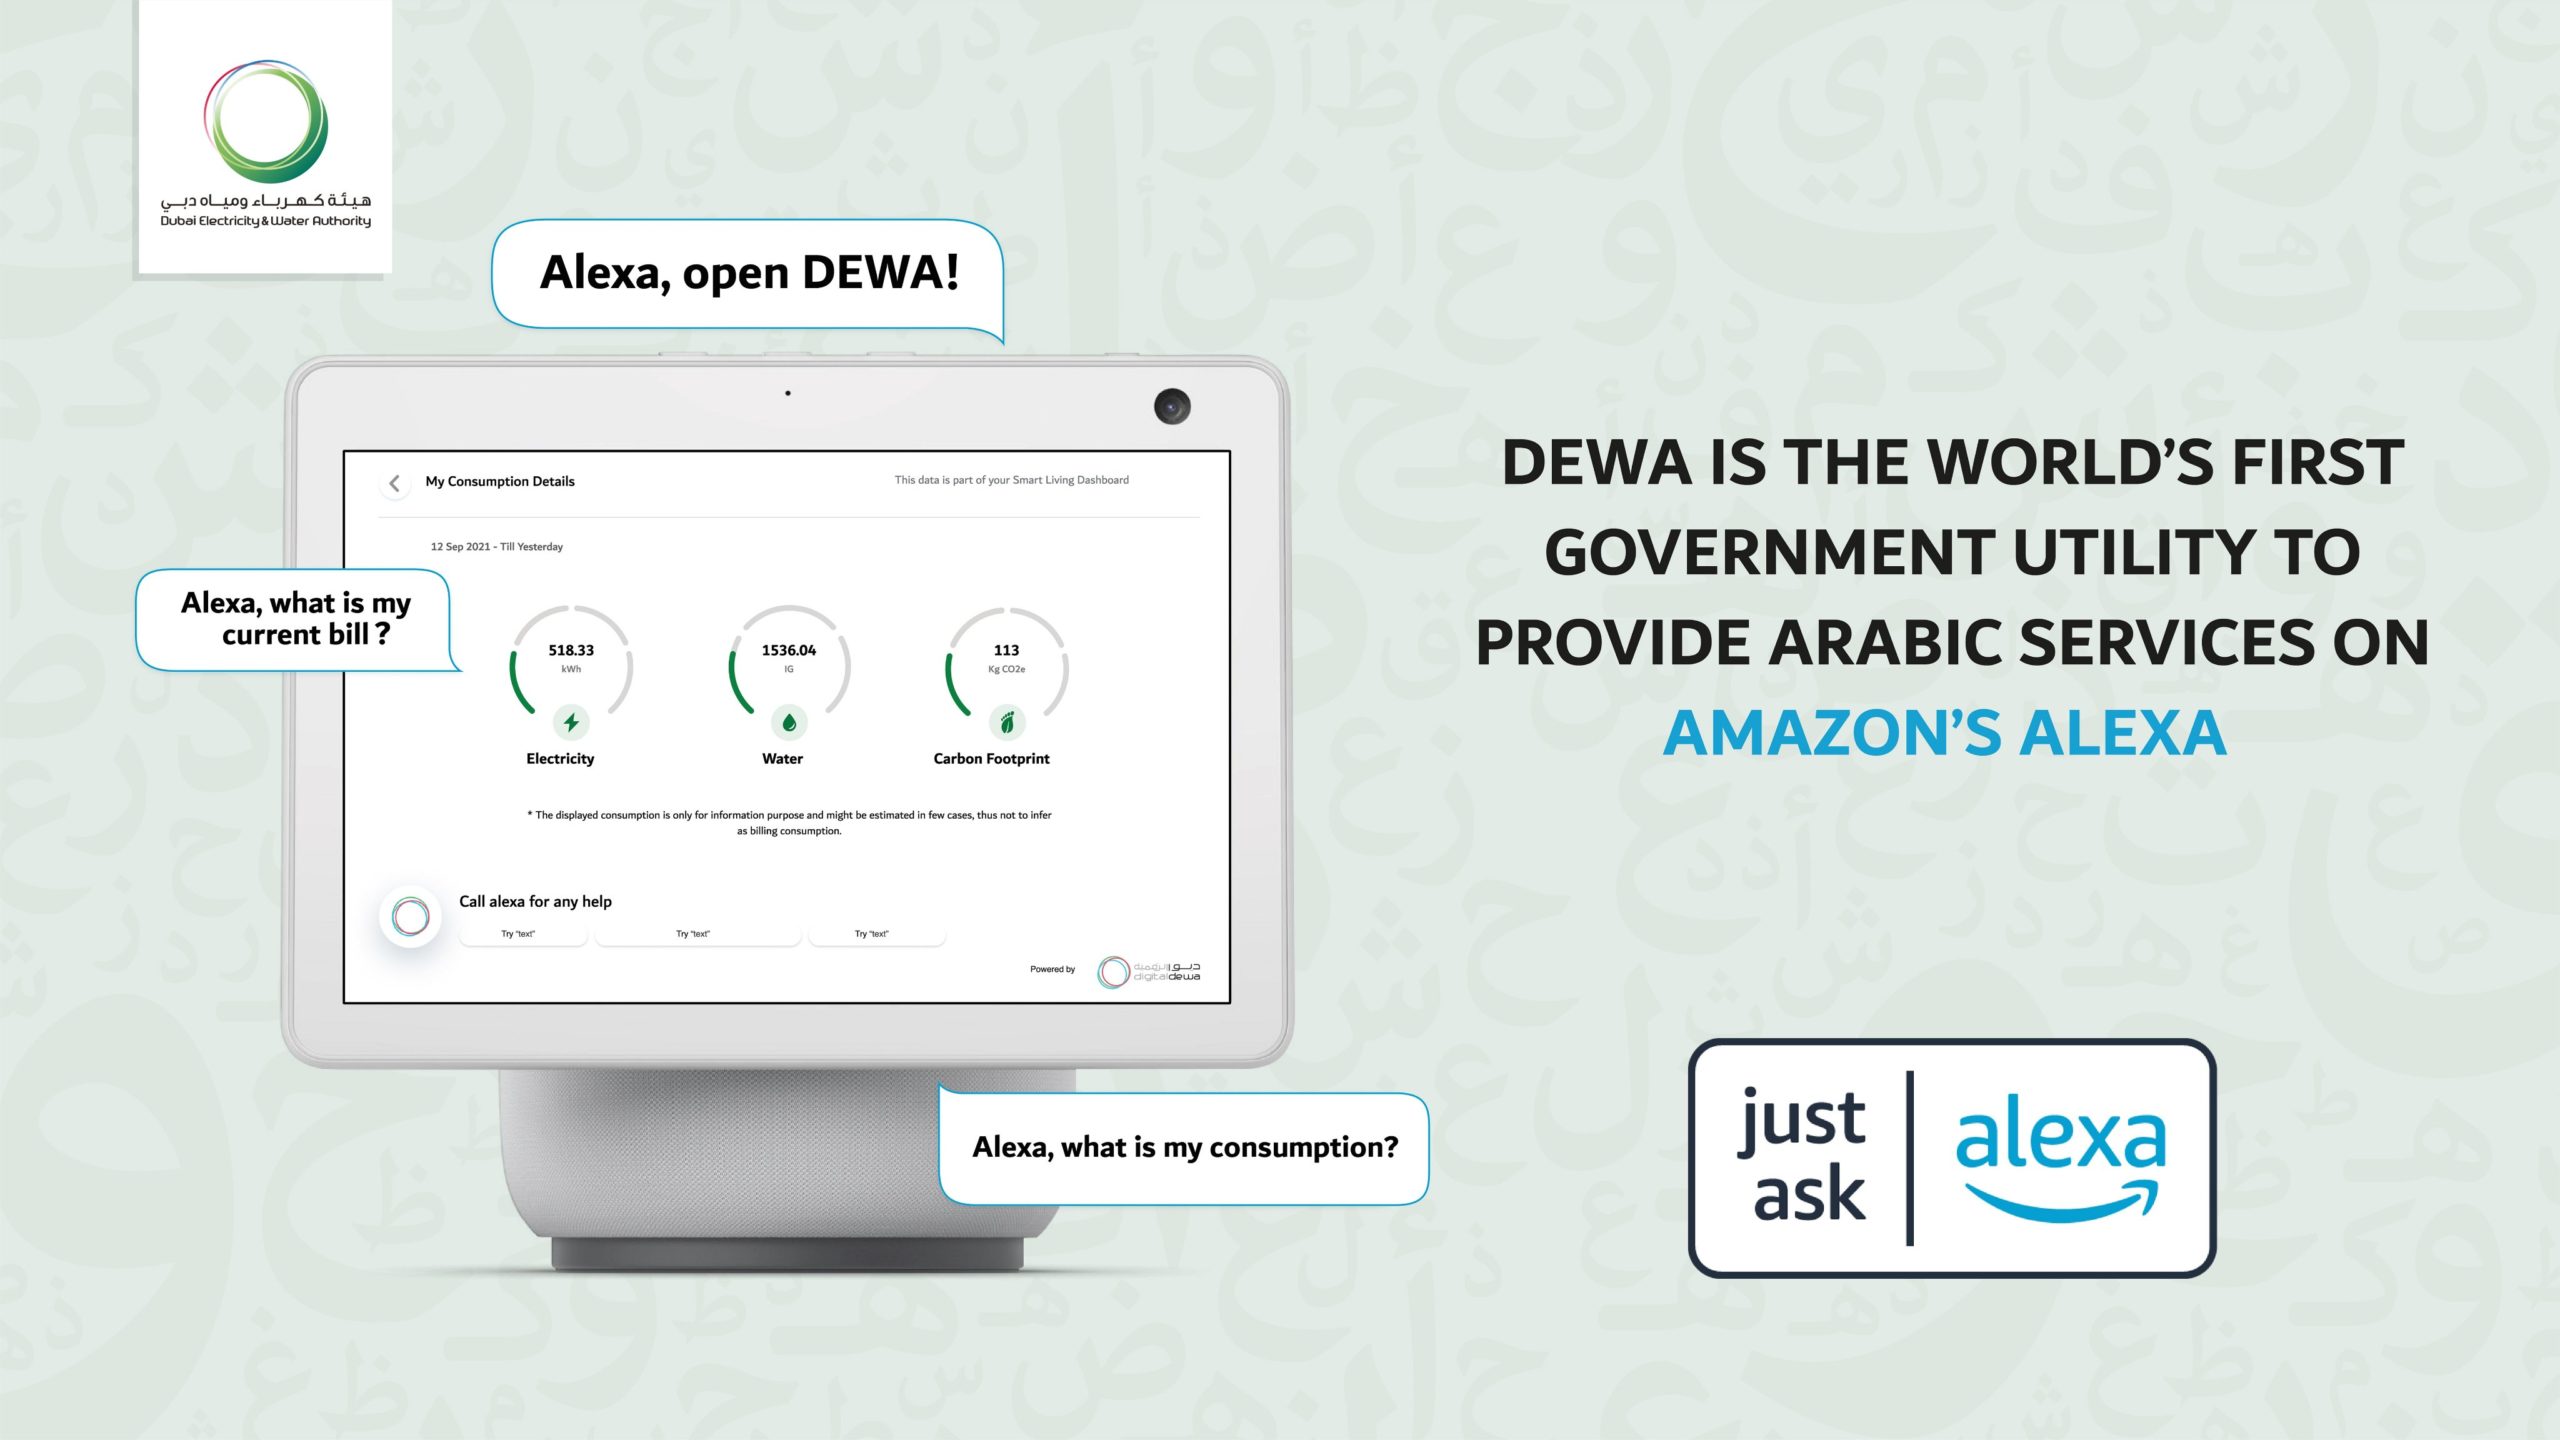 Image for DEWA Is World’s First Government Utility To Provide Arabic Services On Amazon’s Alexa